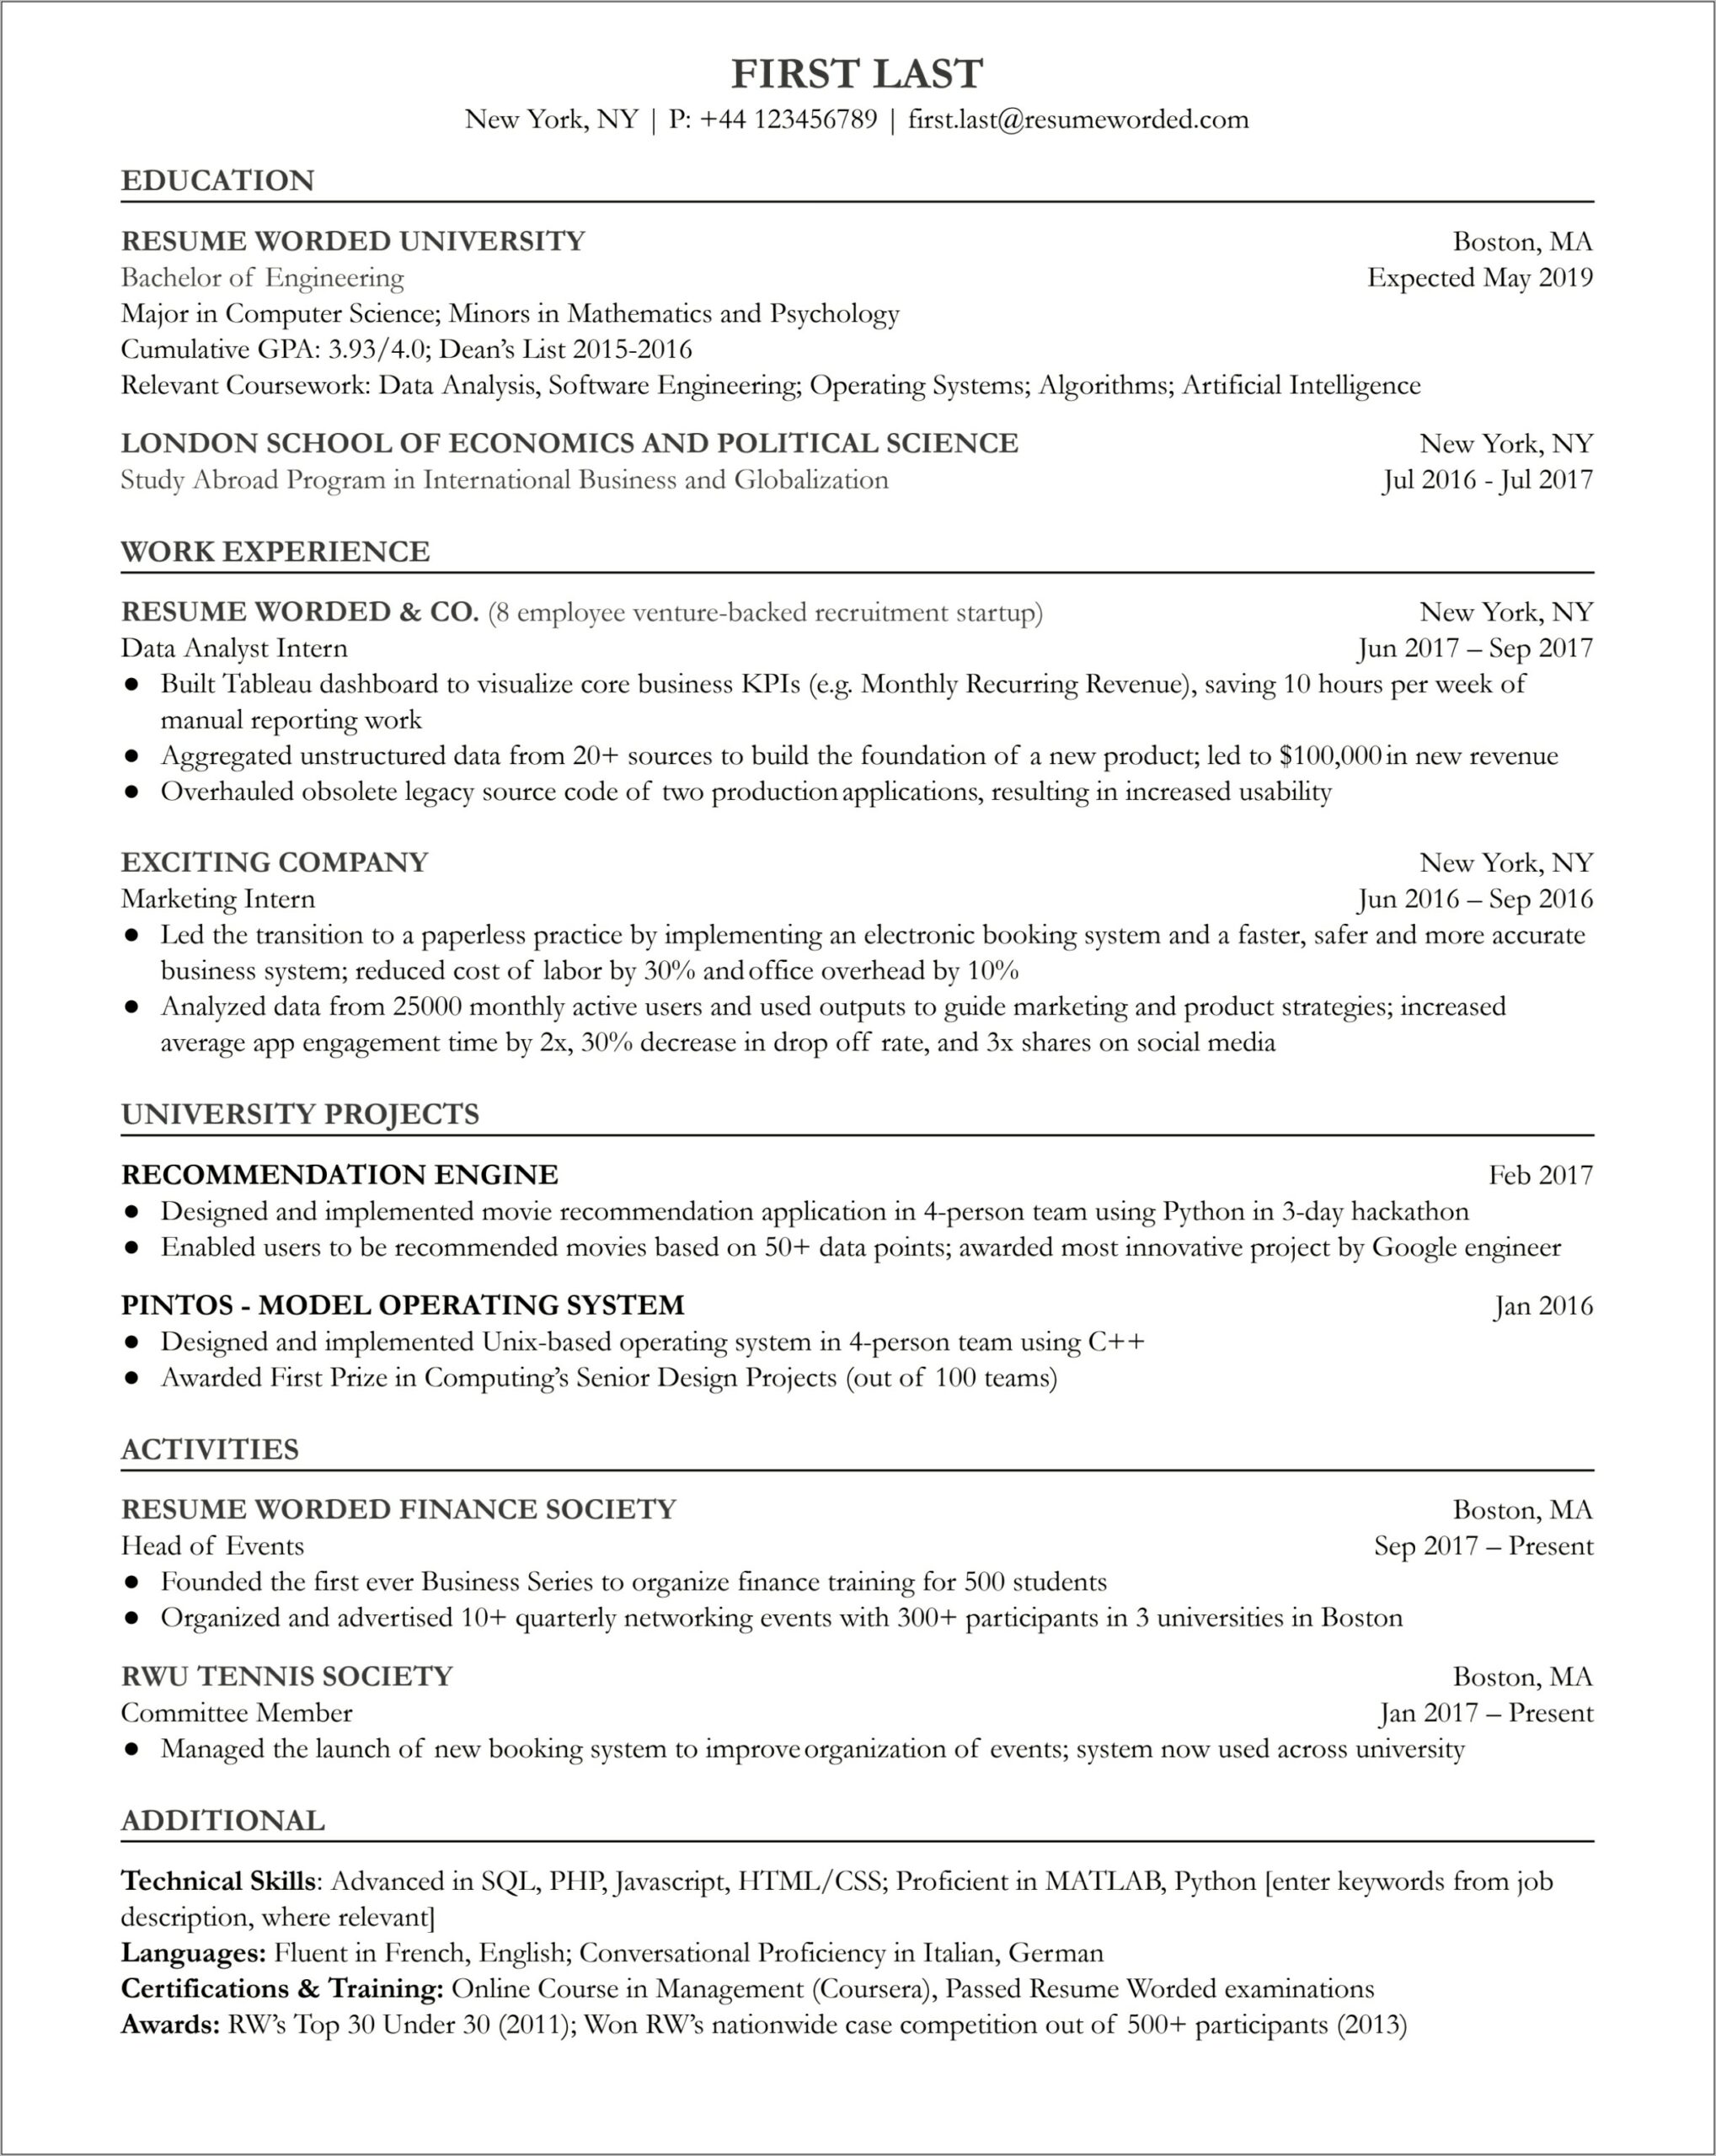 Entry Level Mental Health Resume Example